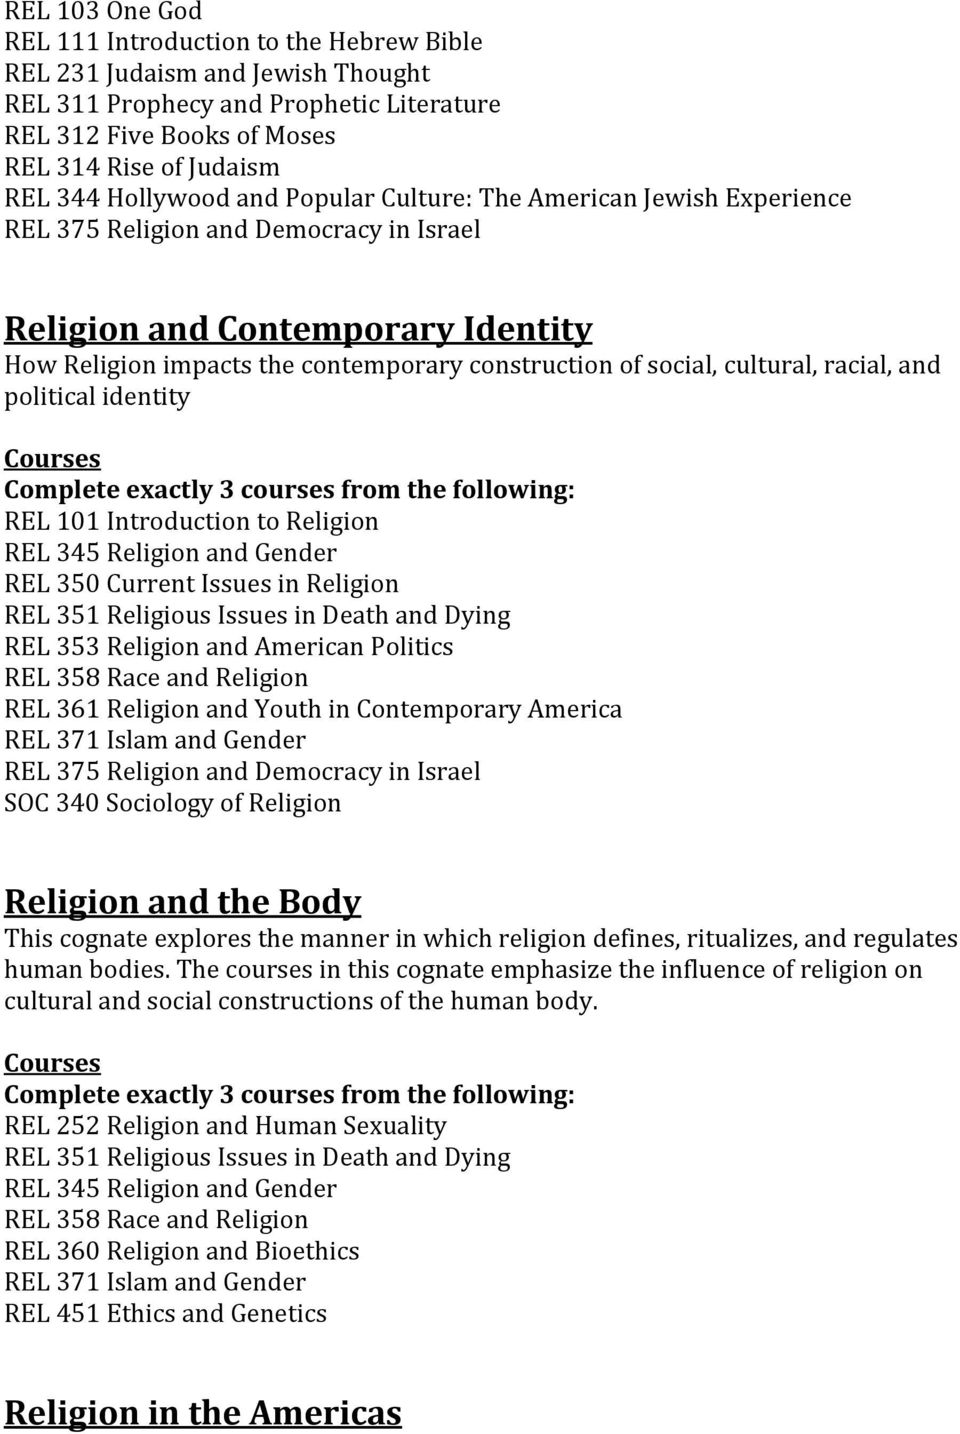 cultural, racial, and political identity REL 101 Introduction to Religion REL 345 Religion and Gender REL 358 Race and Religion REL 361 Religion and Youth in Contemporary America REL 371 Islam and